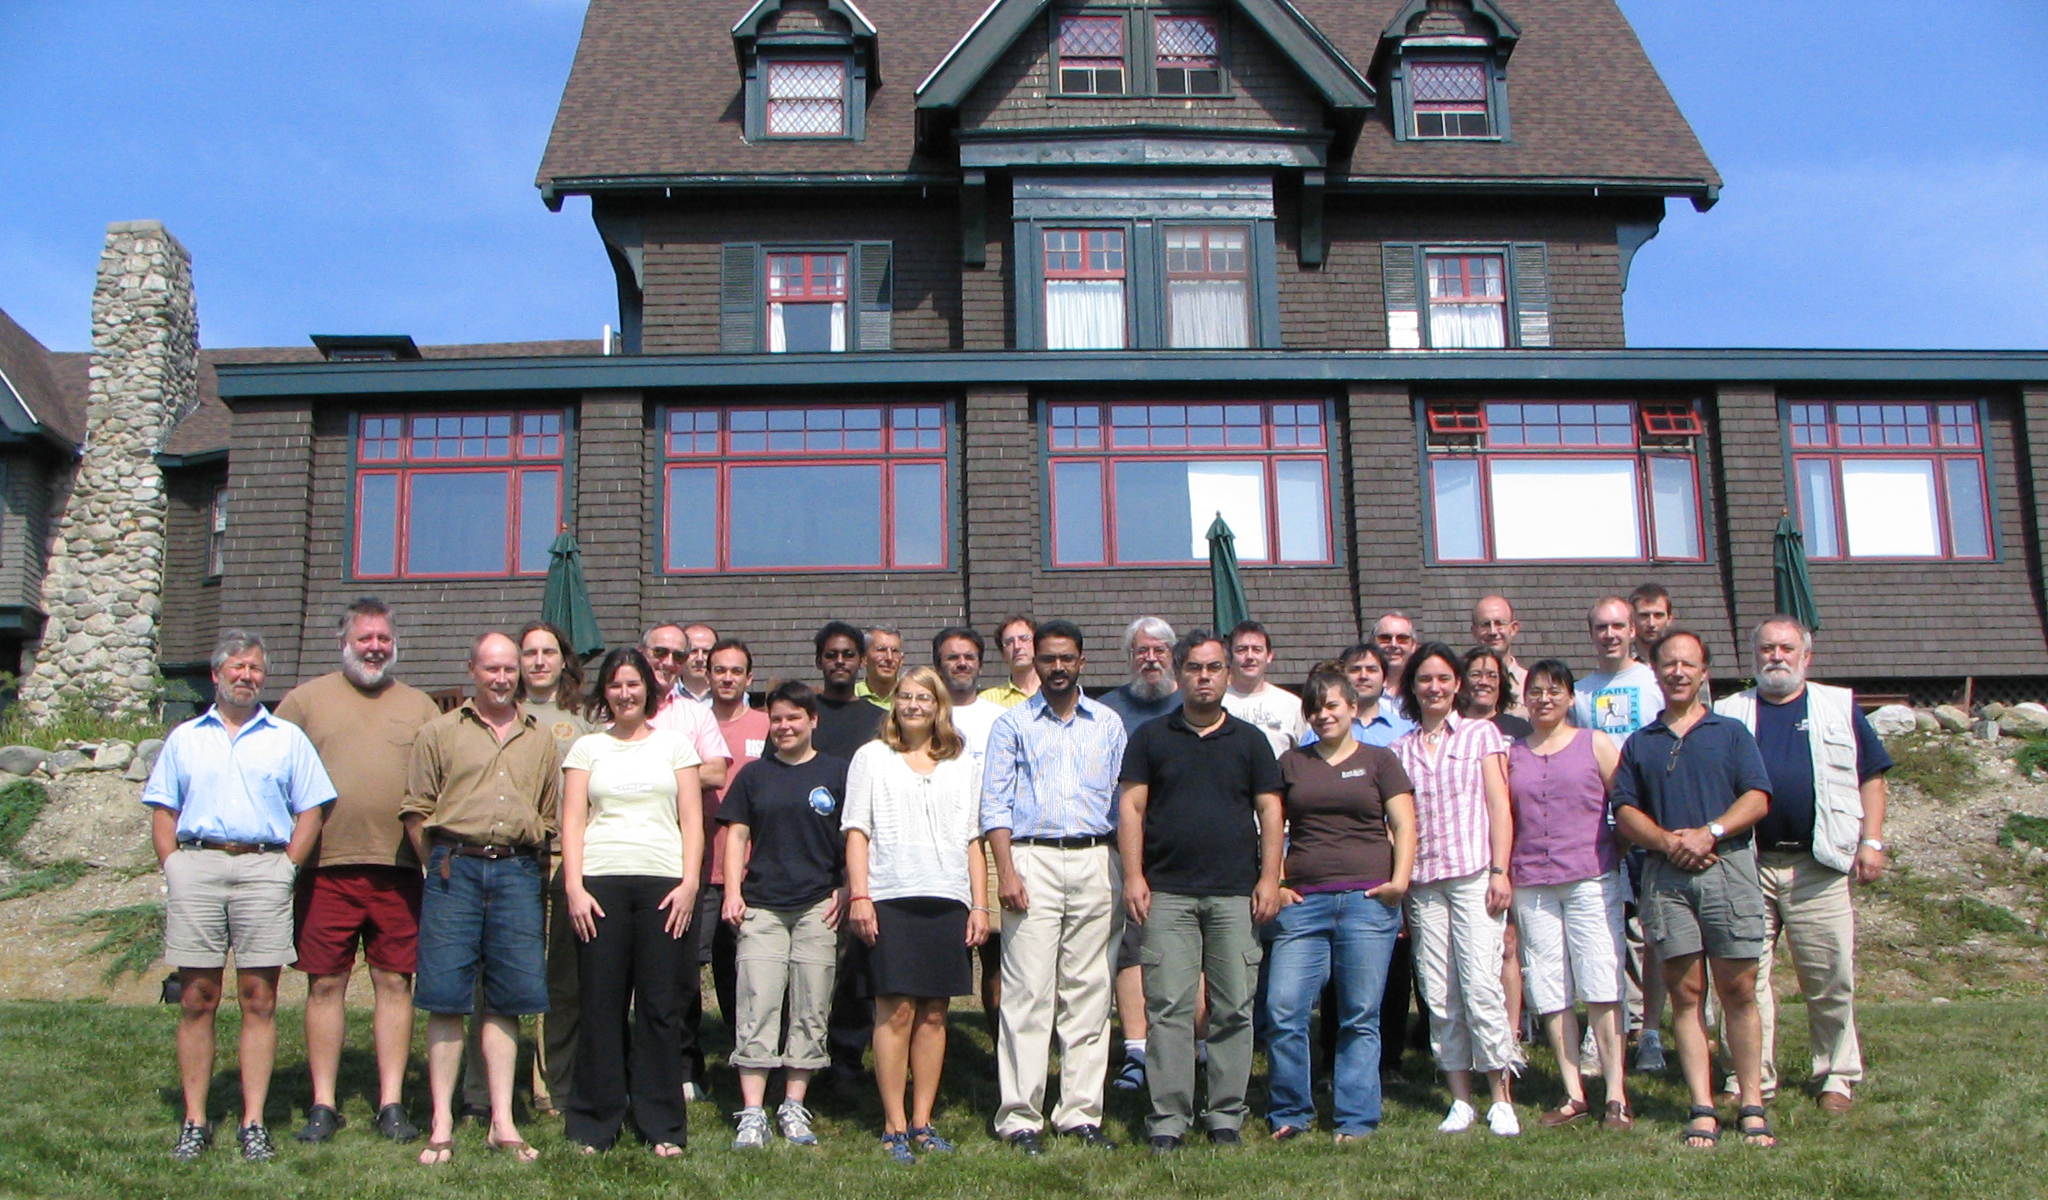 Participants at the ITASE Synthesis Workshop, held at the Manor Inn, Castine, Maine from 2-5 September 2008